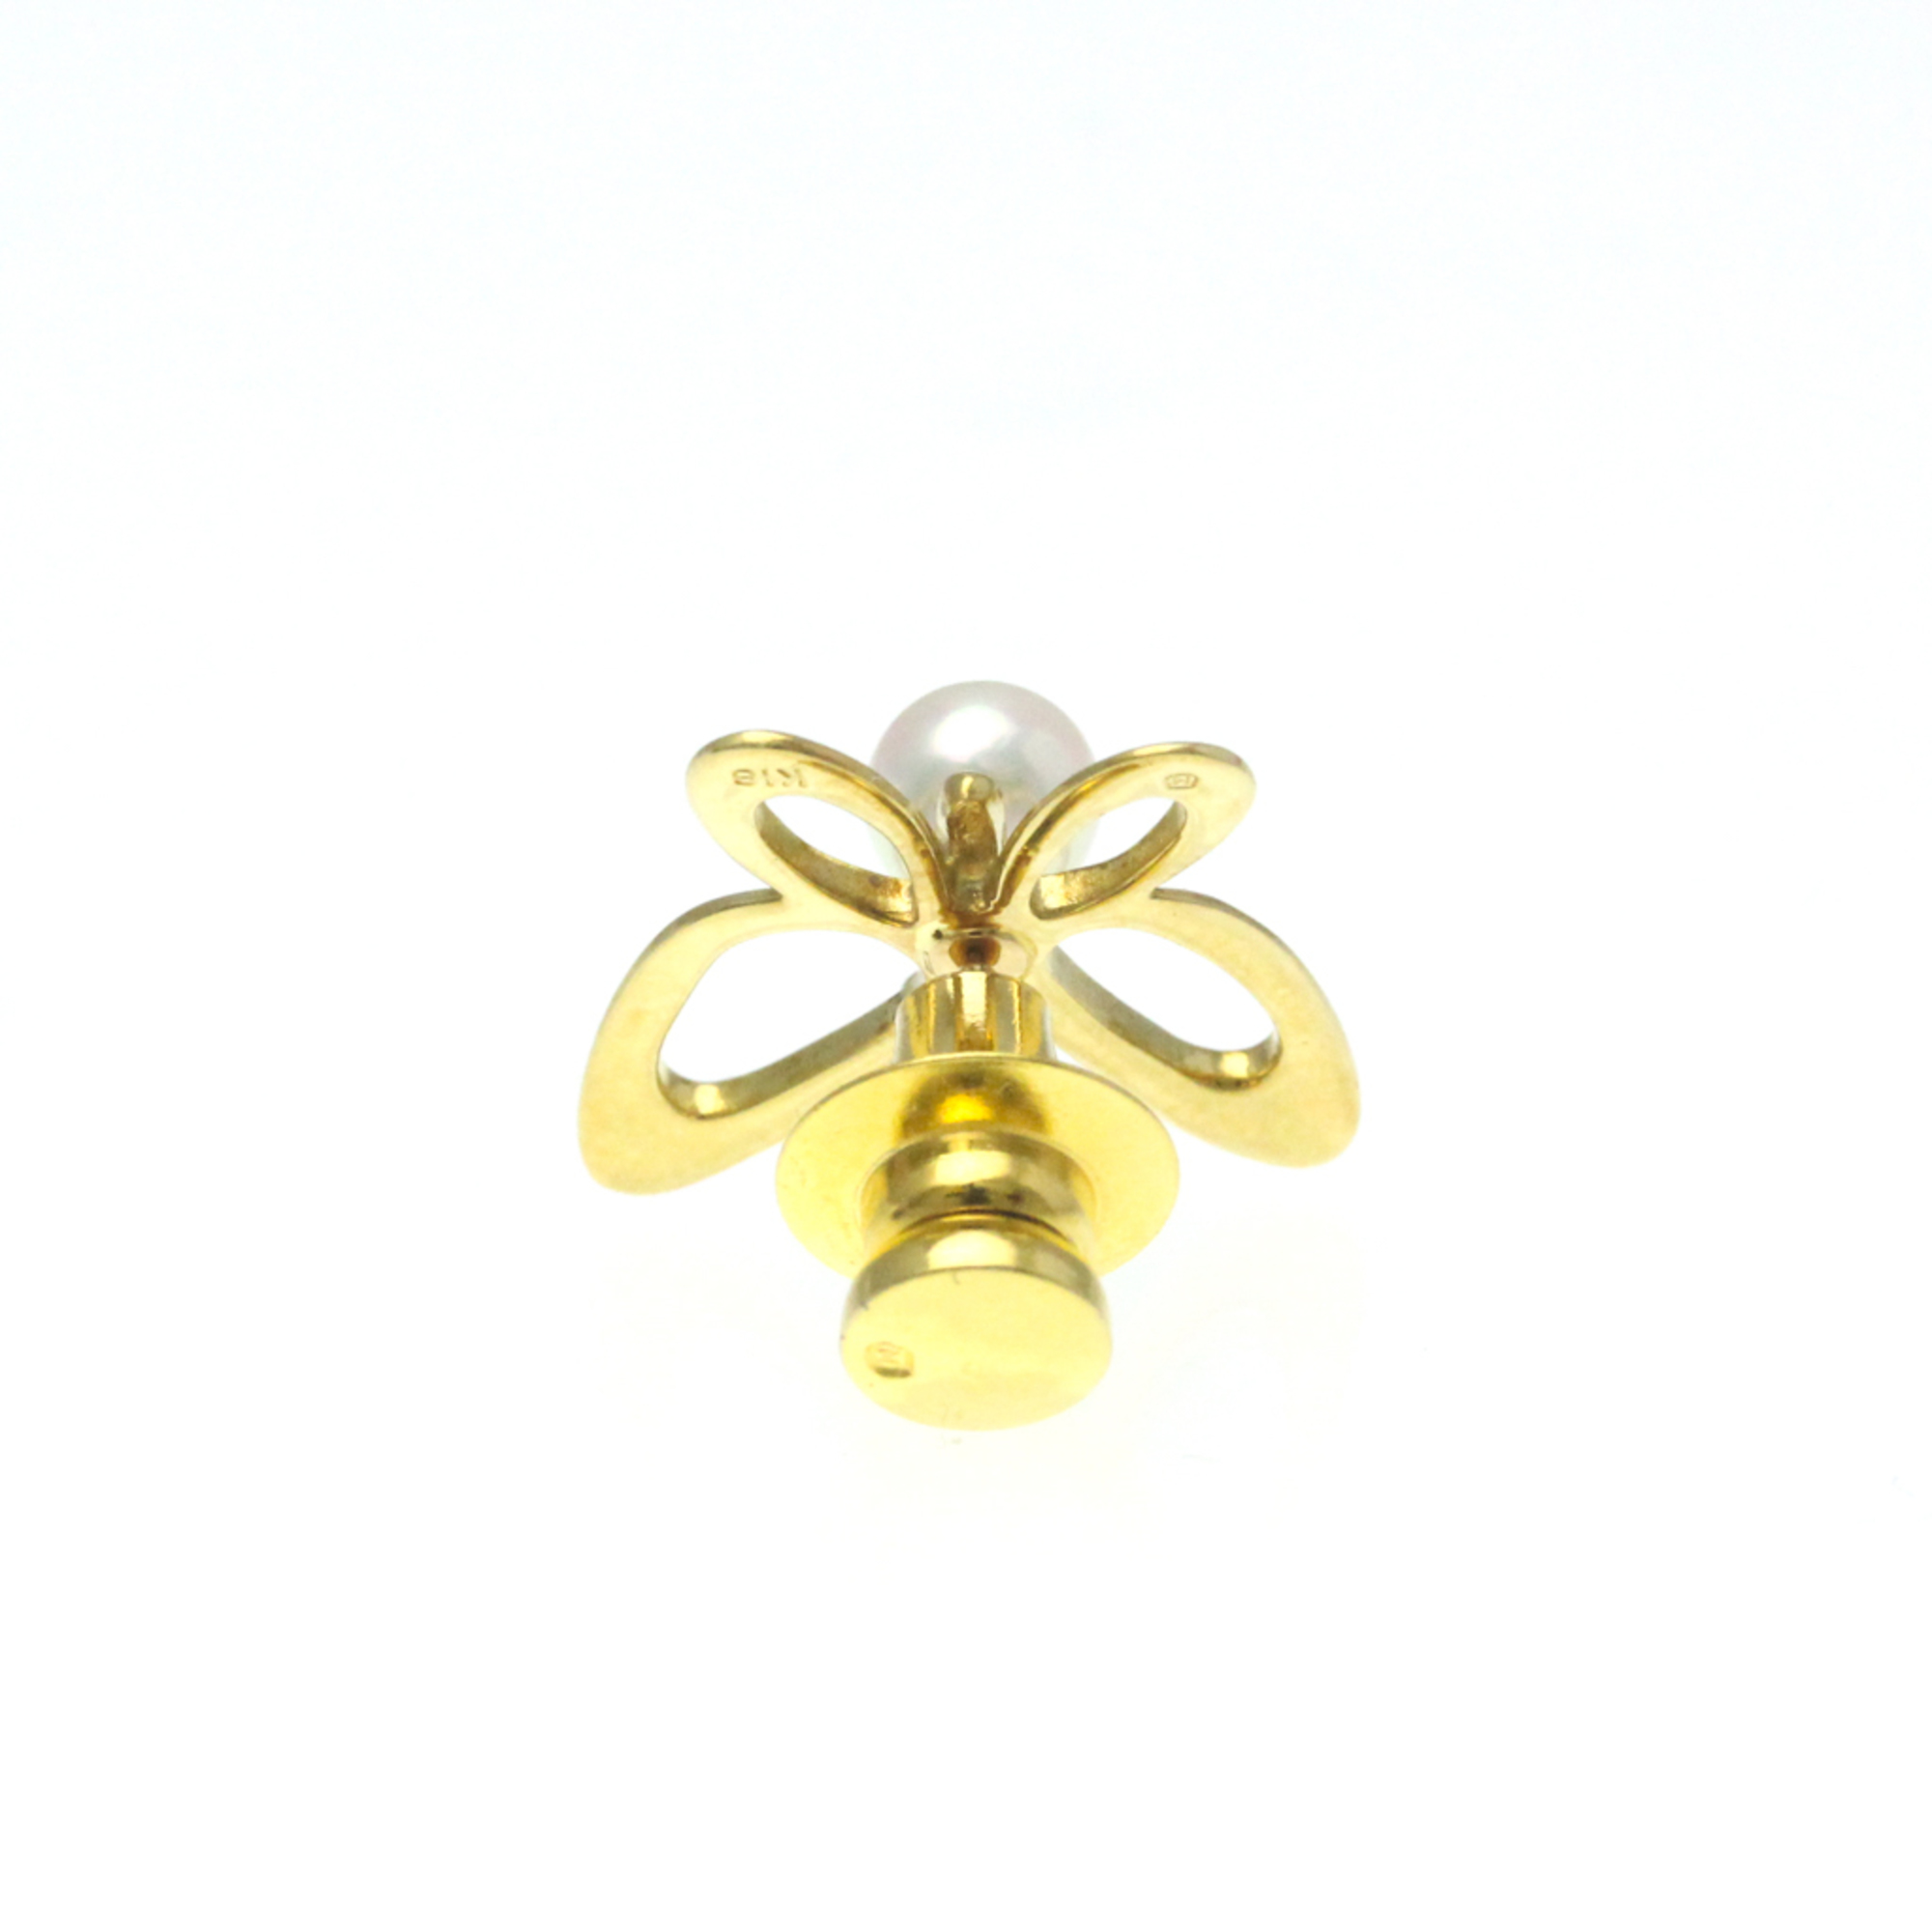 Mikimoto Pearl Butterfly Brooch Yellow Gold (18K) Pearl Pin Brooch Gold